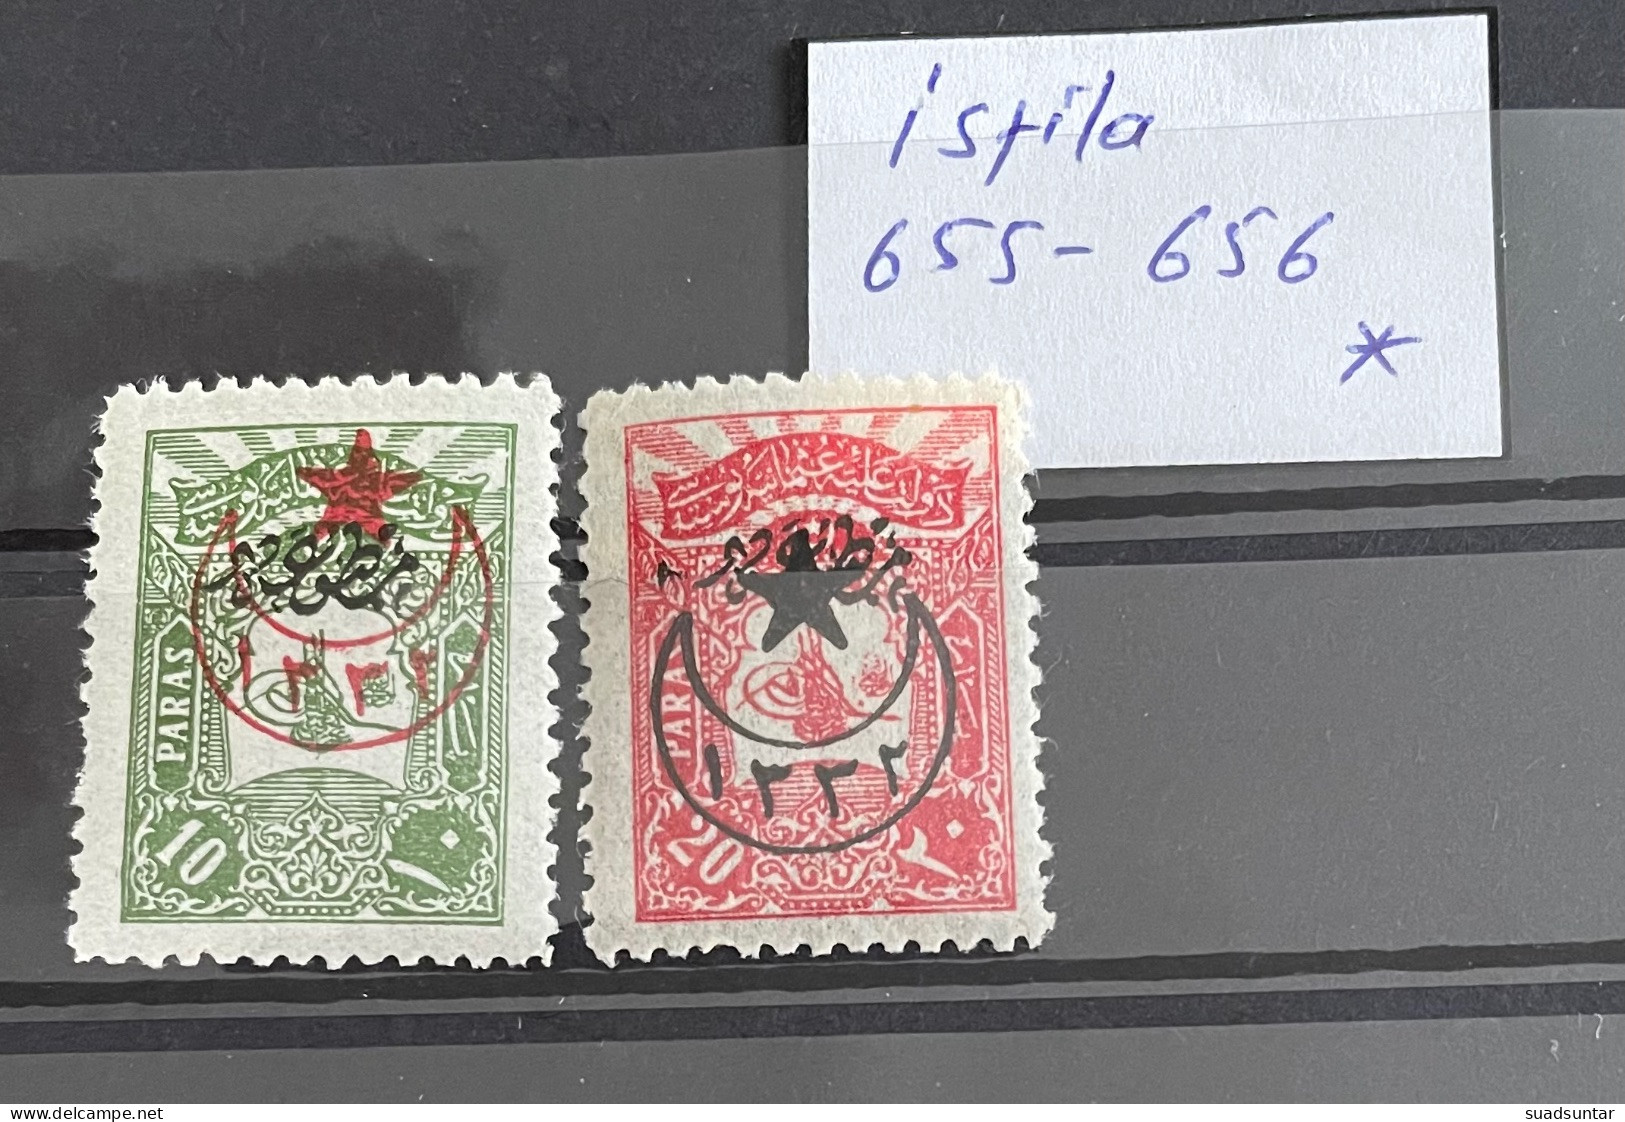 1916 5 Star Overprinted Stamps MH Isfila 655-656 High Values - Ungebraucht